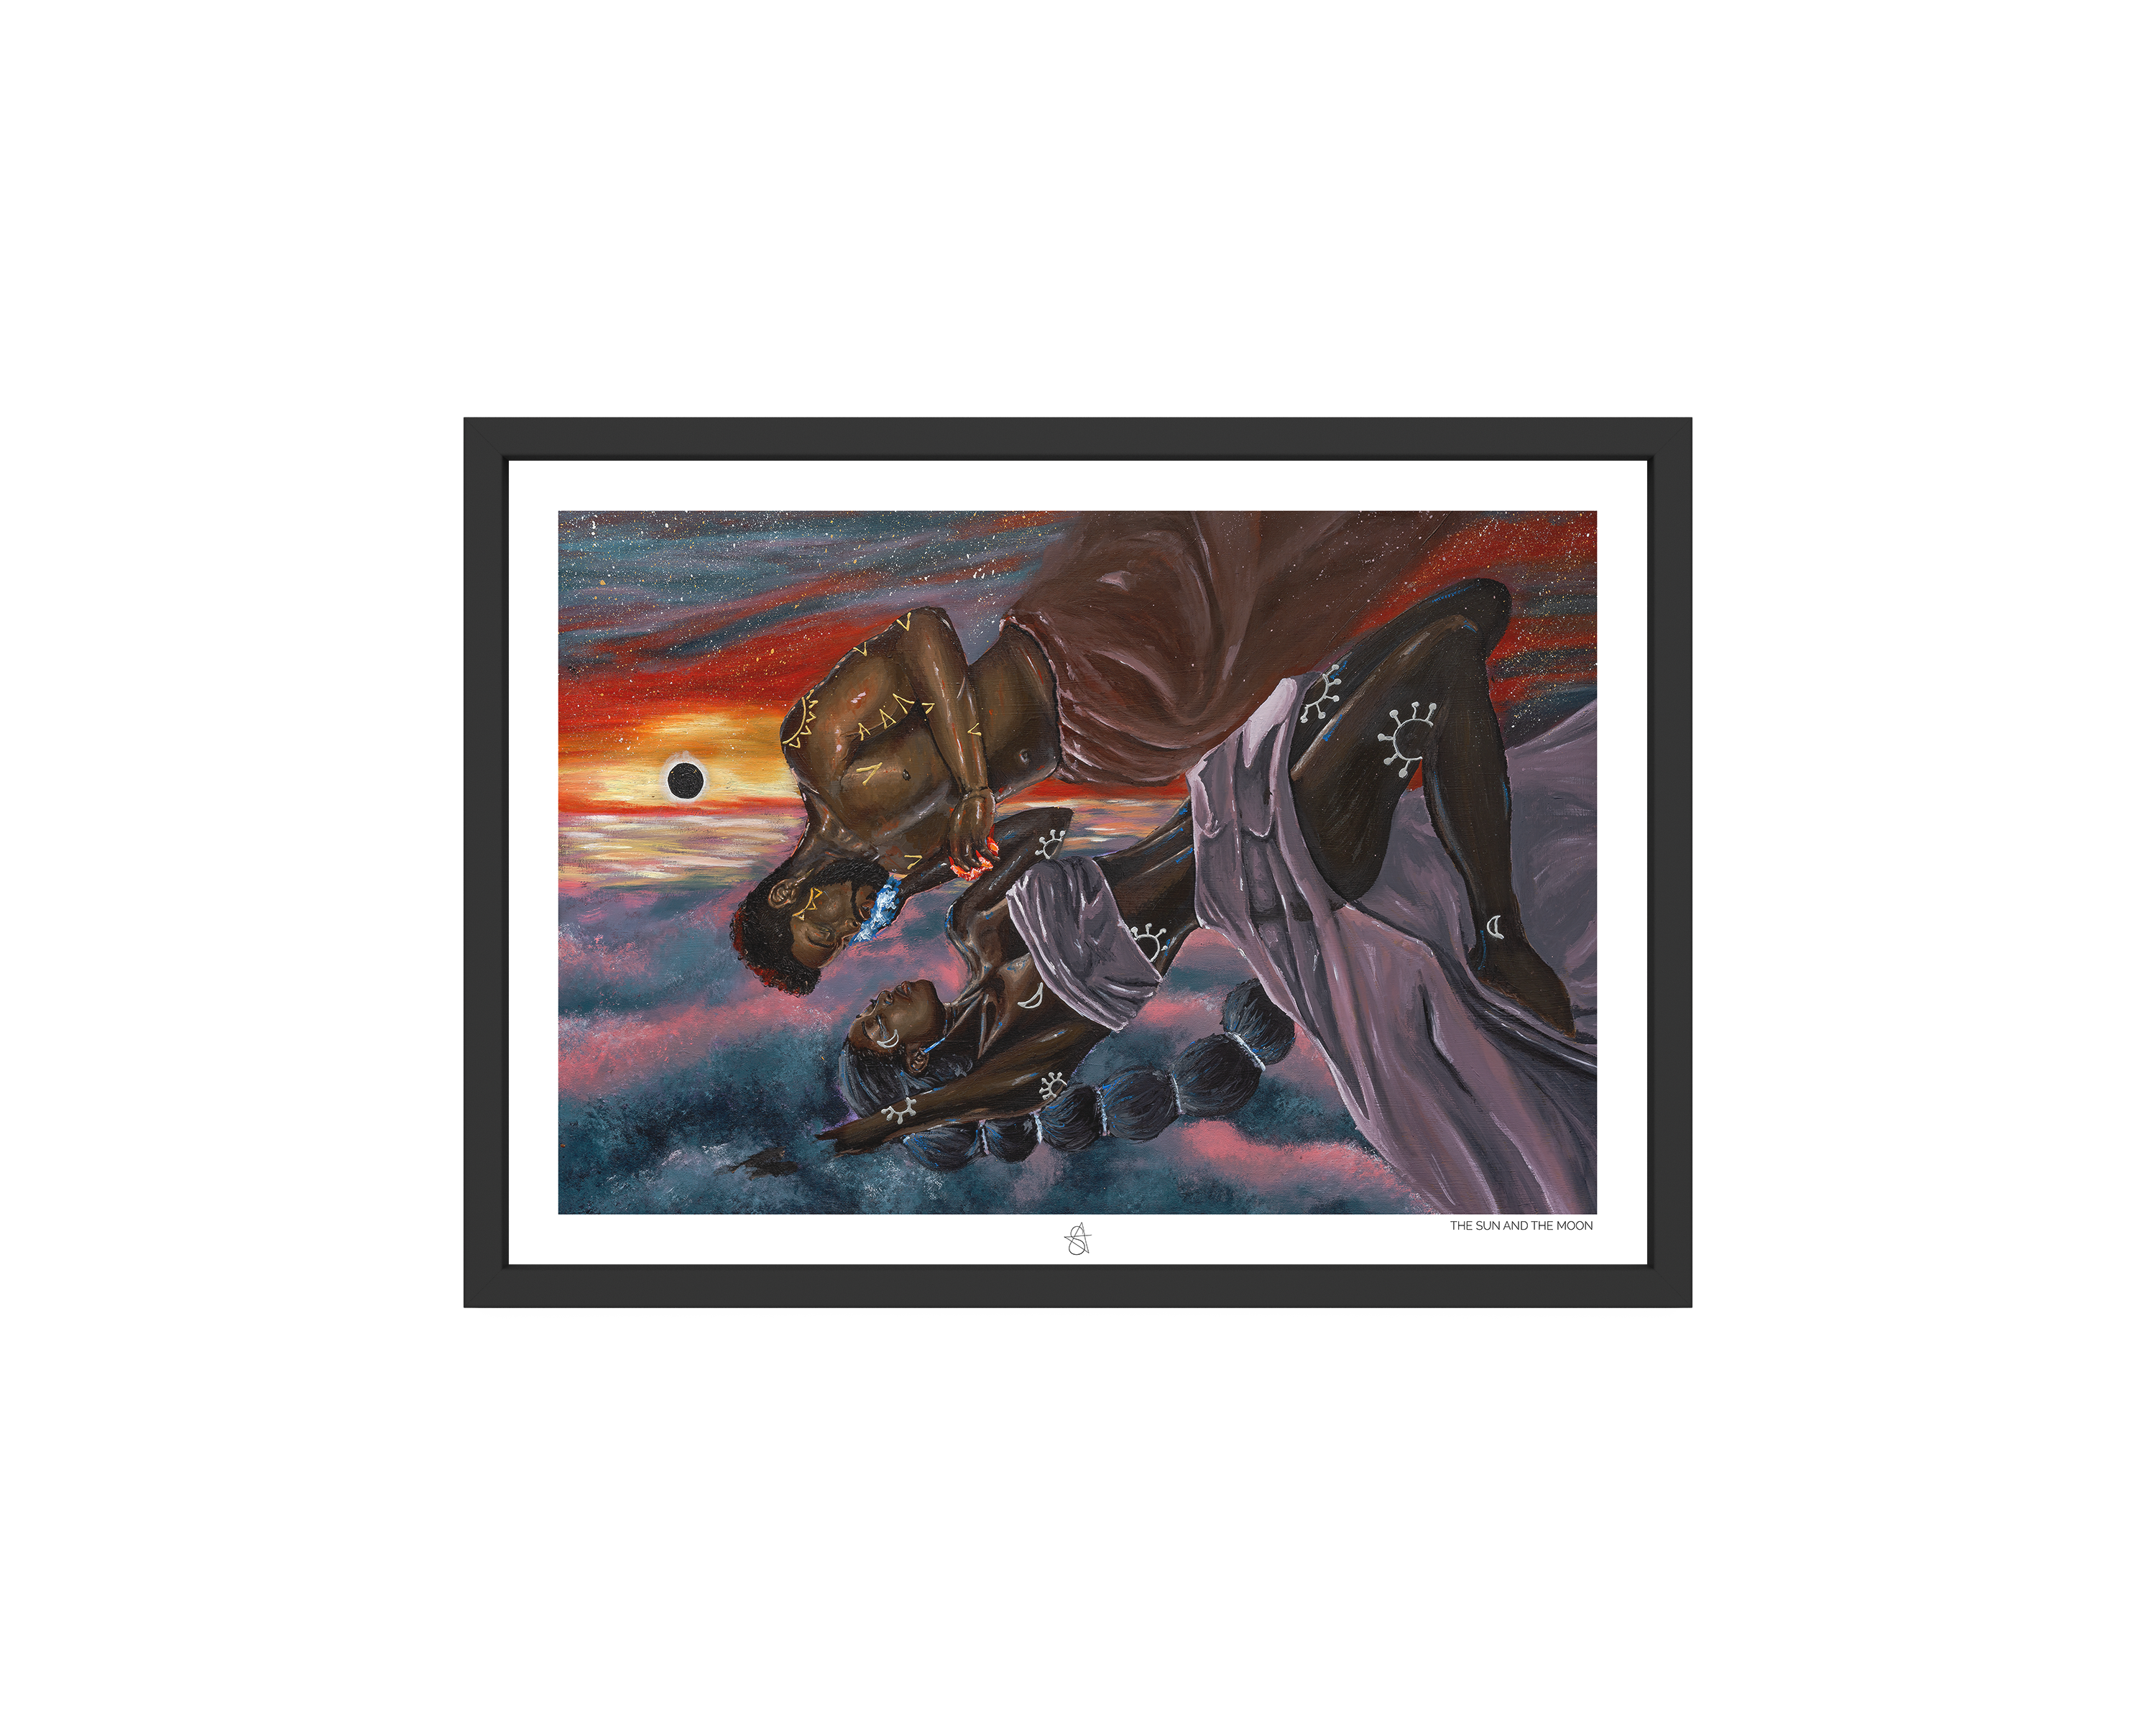 The Sun and The Moon Art Print on high-quality matte or velvet paper, framed in gallery black, white, or natural maple, depicting the Krachi folktale about how the Sun and the Moon fell in love